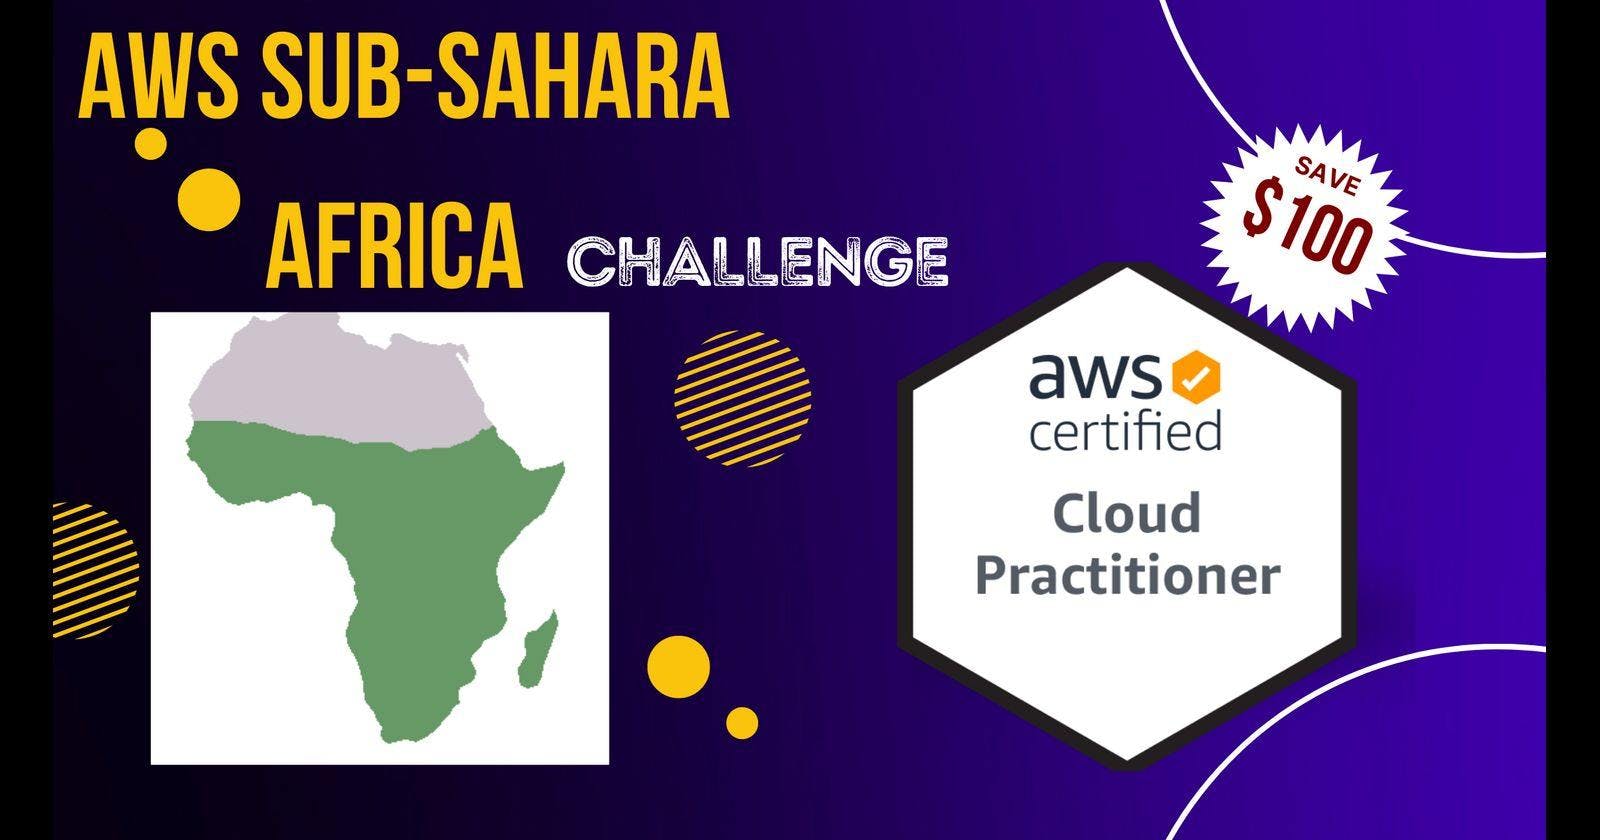 How to get AWS Certified for free
with the AWS Sub-Saharan Africa
Cloud Practitioner CHALLENGE